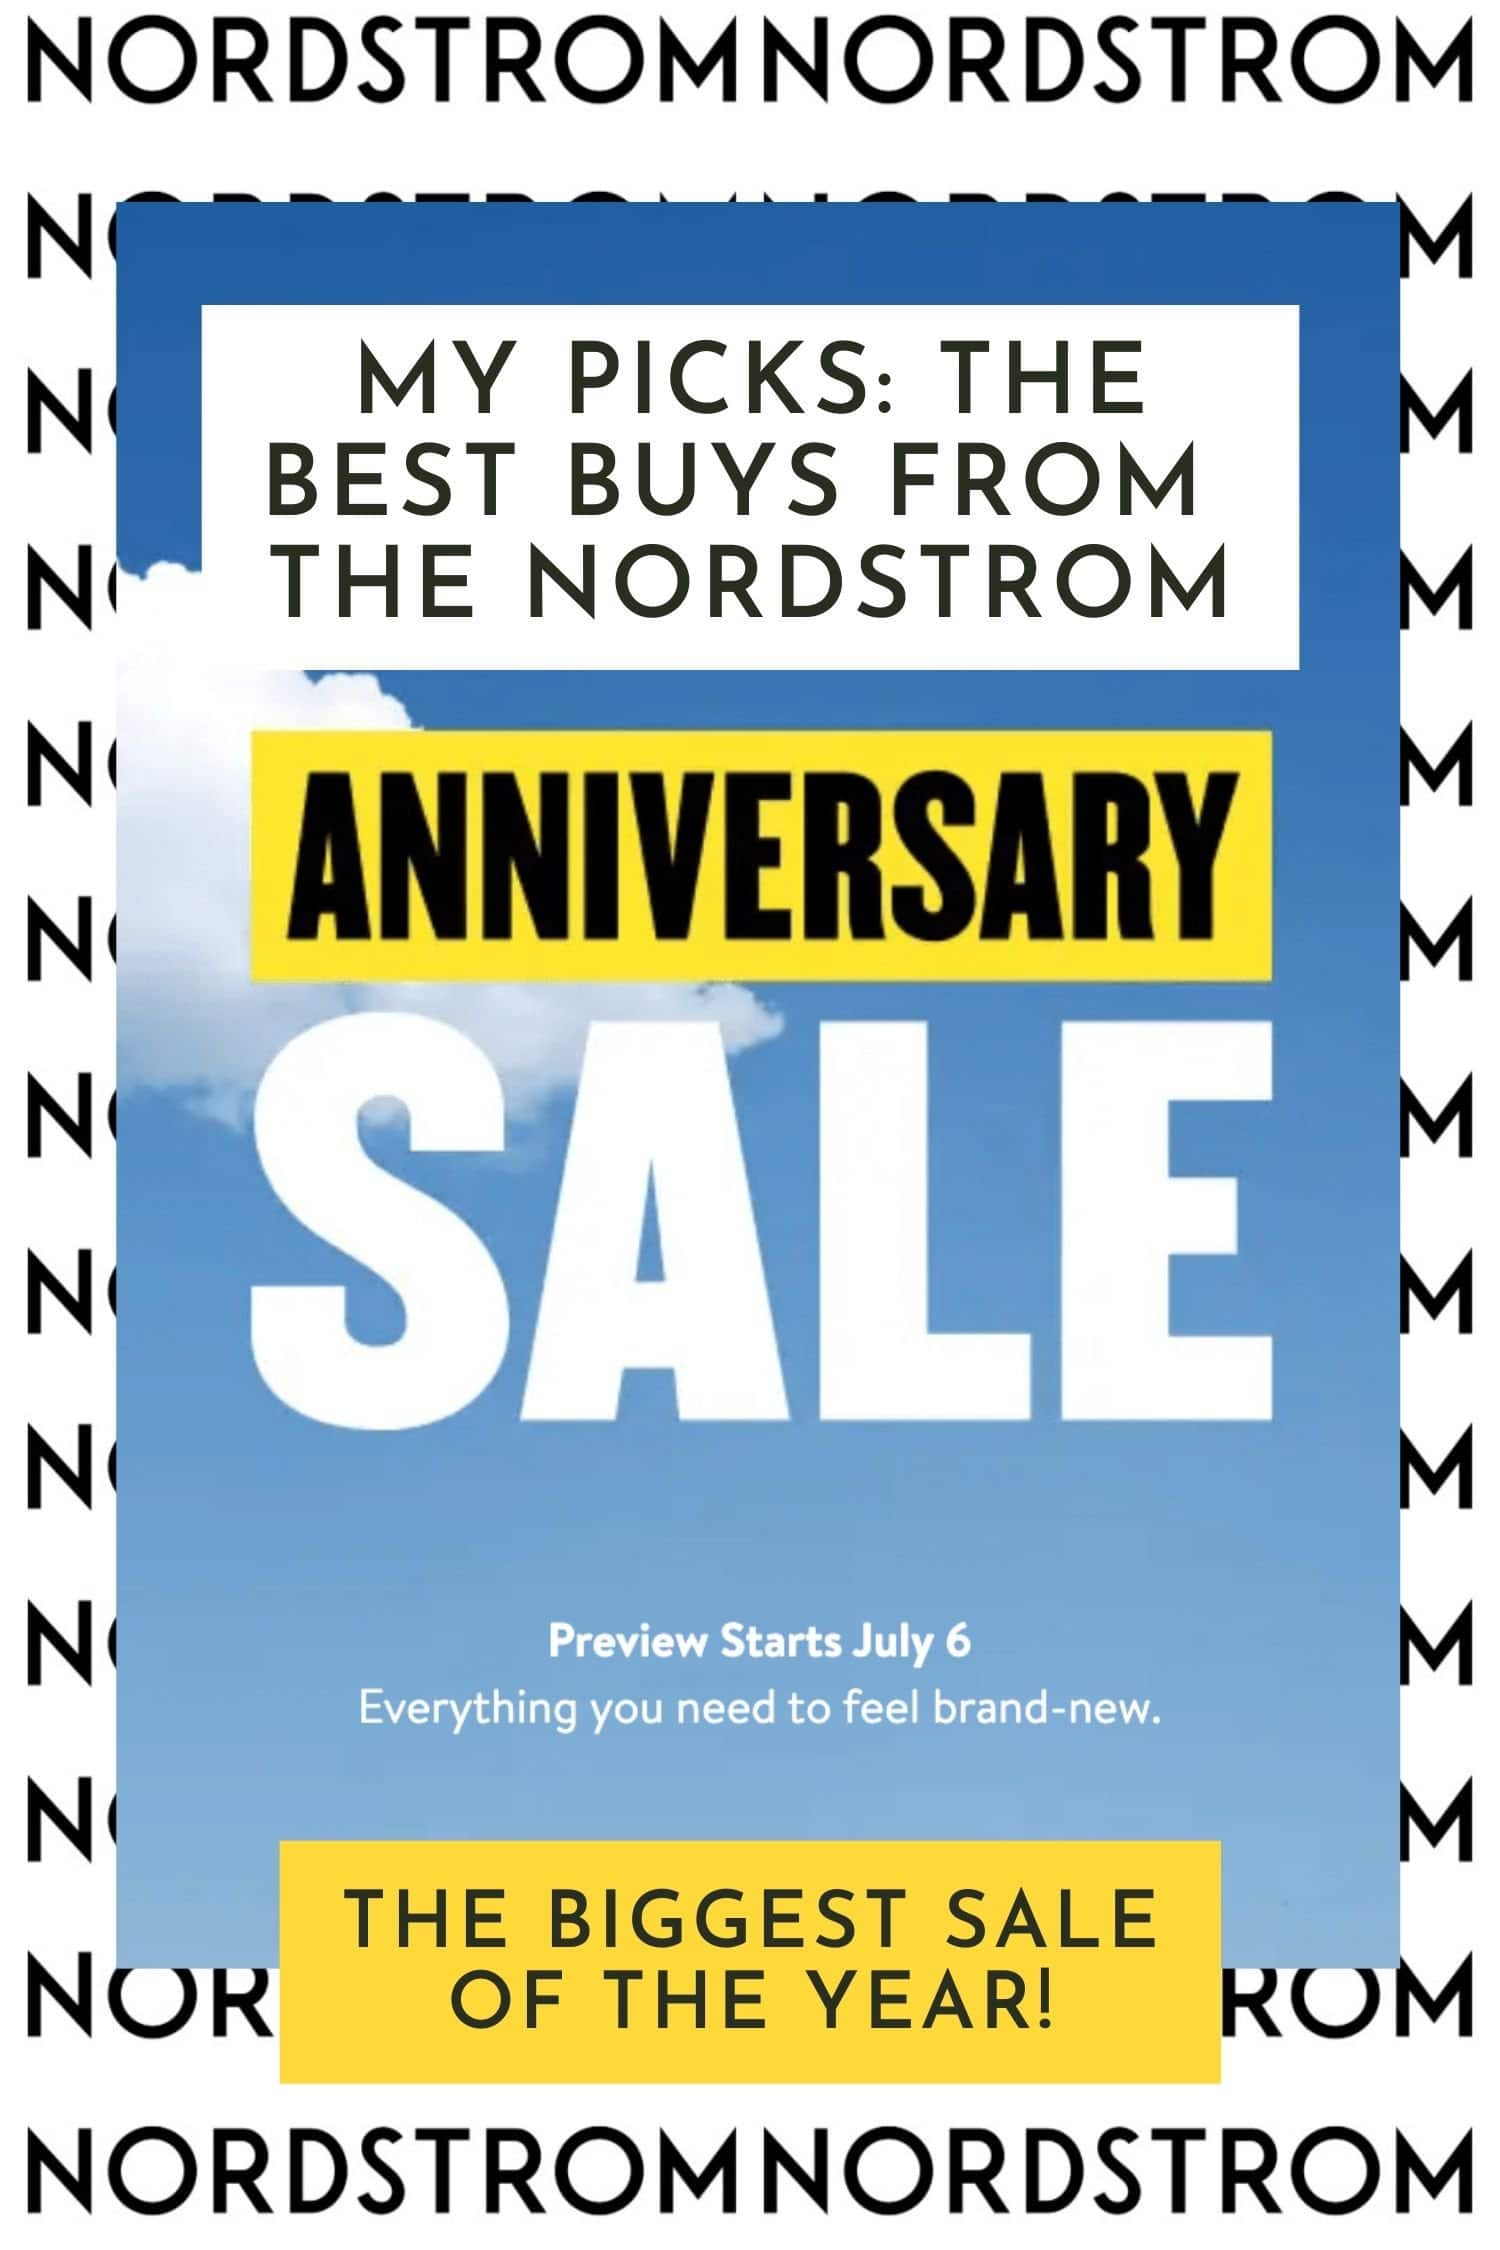 My Picks from the Nordstrom Anniversary Sale: 2021 Edition